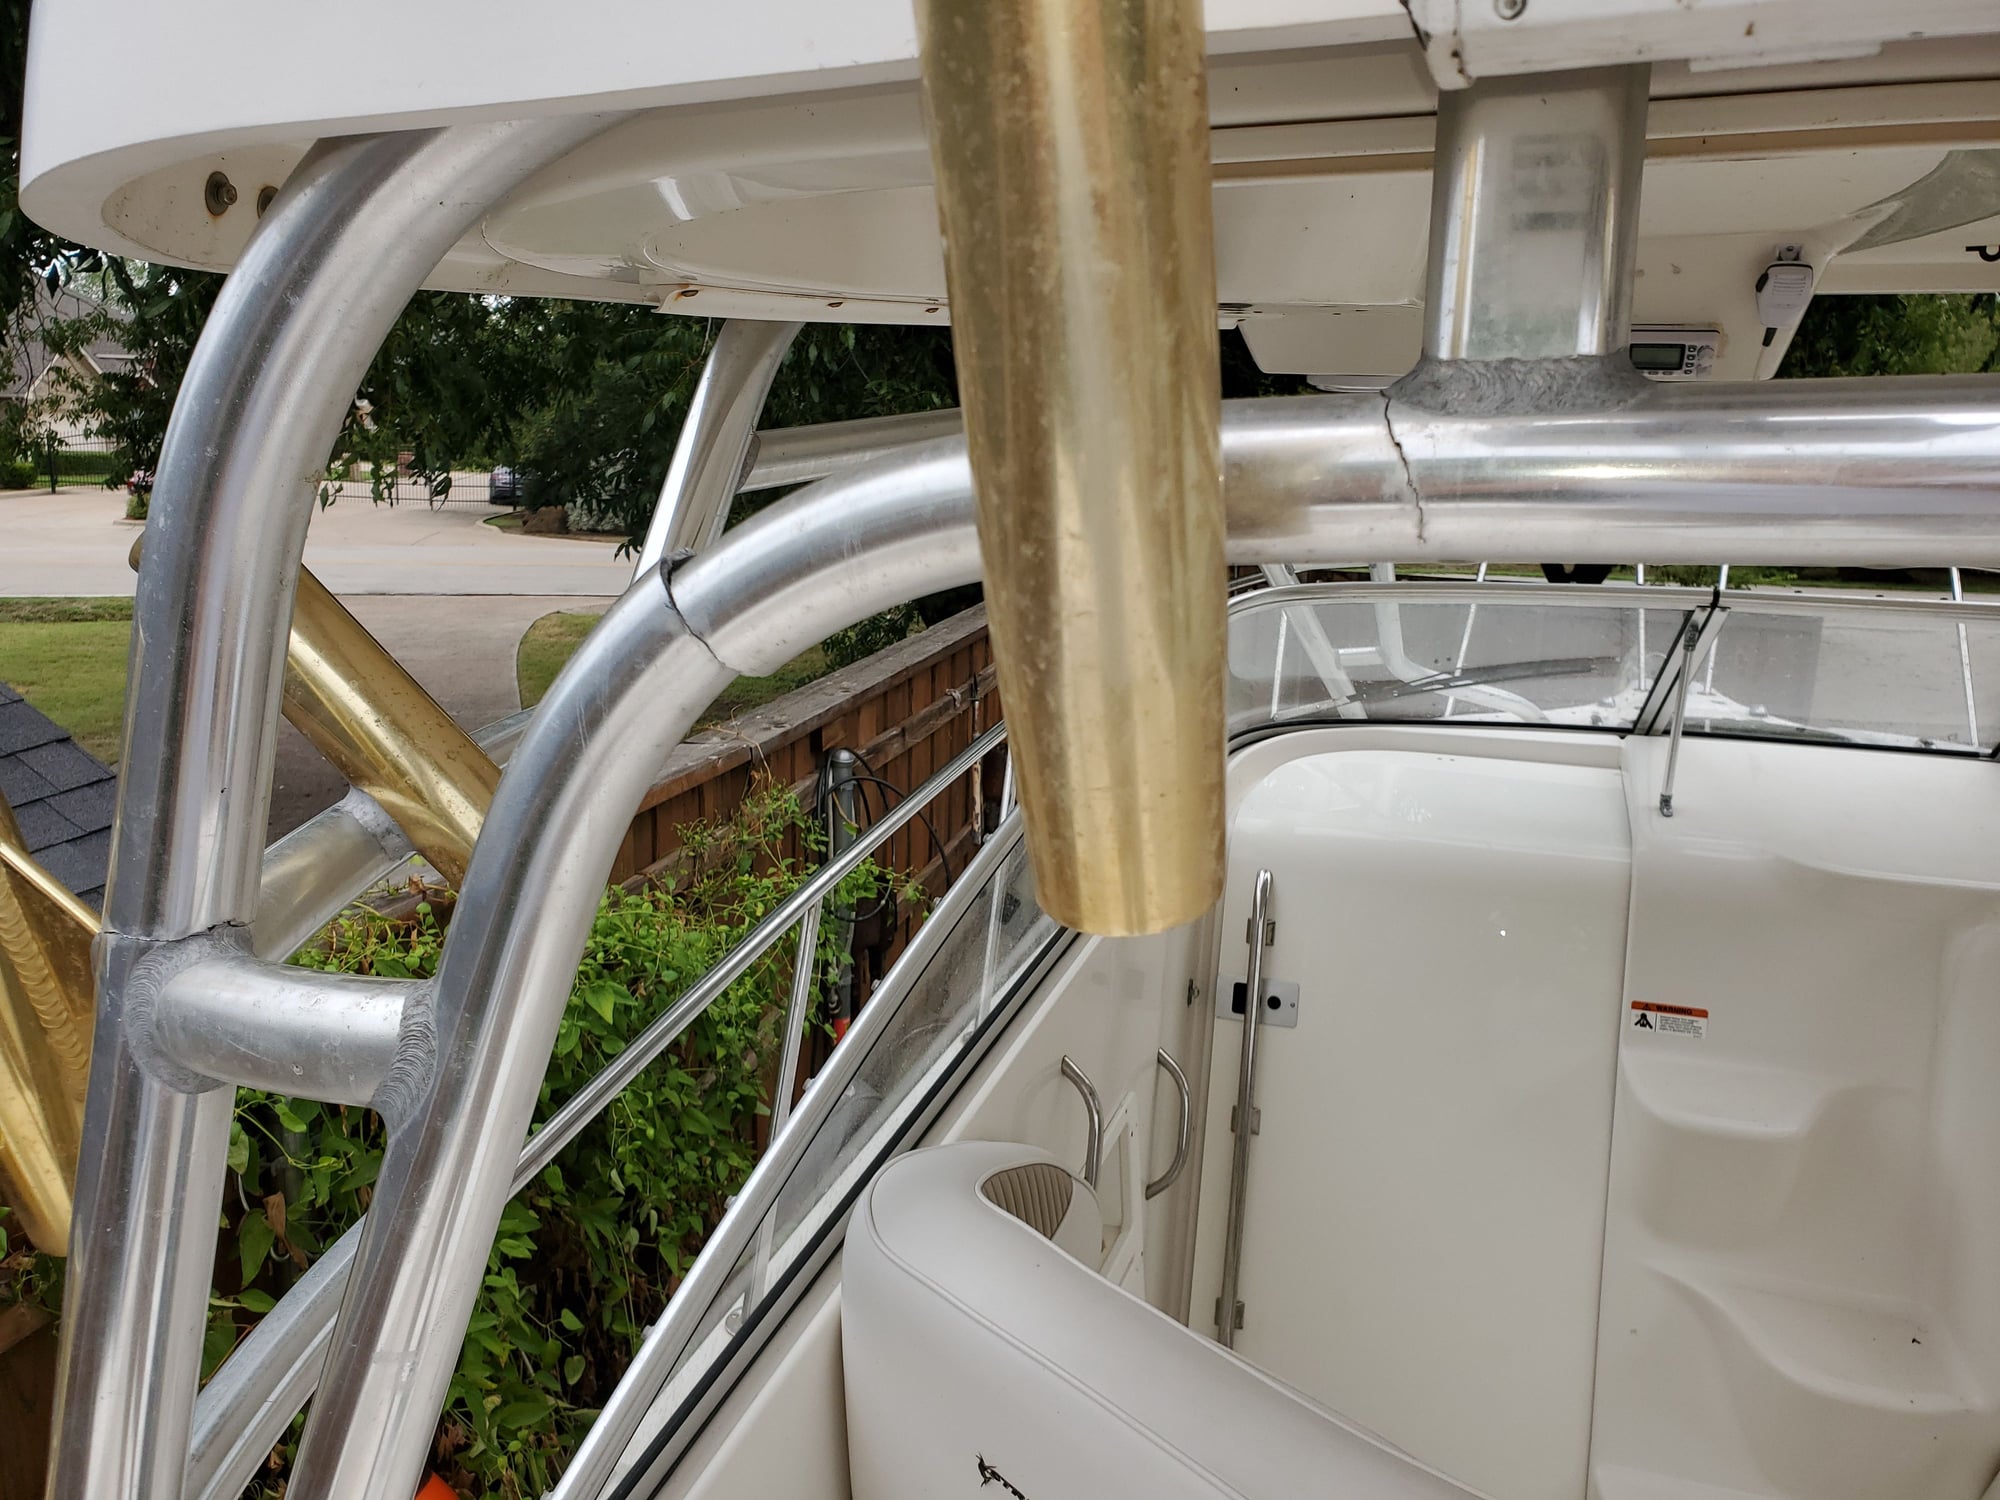 Pacific yacht aluminum t-top cracked and broken in 4 places, can i